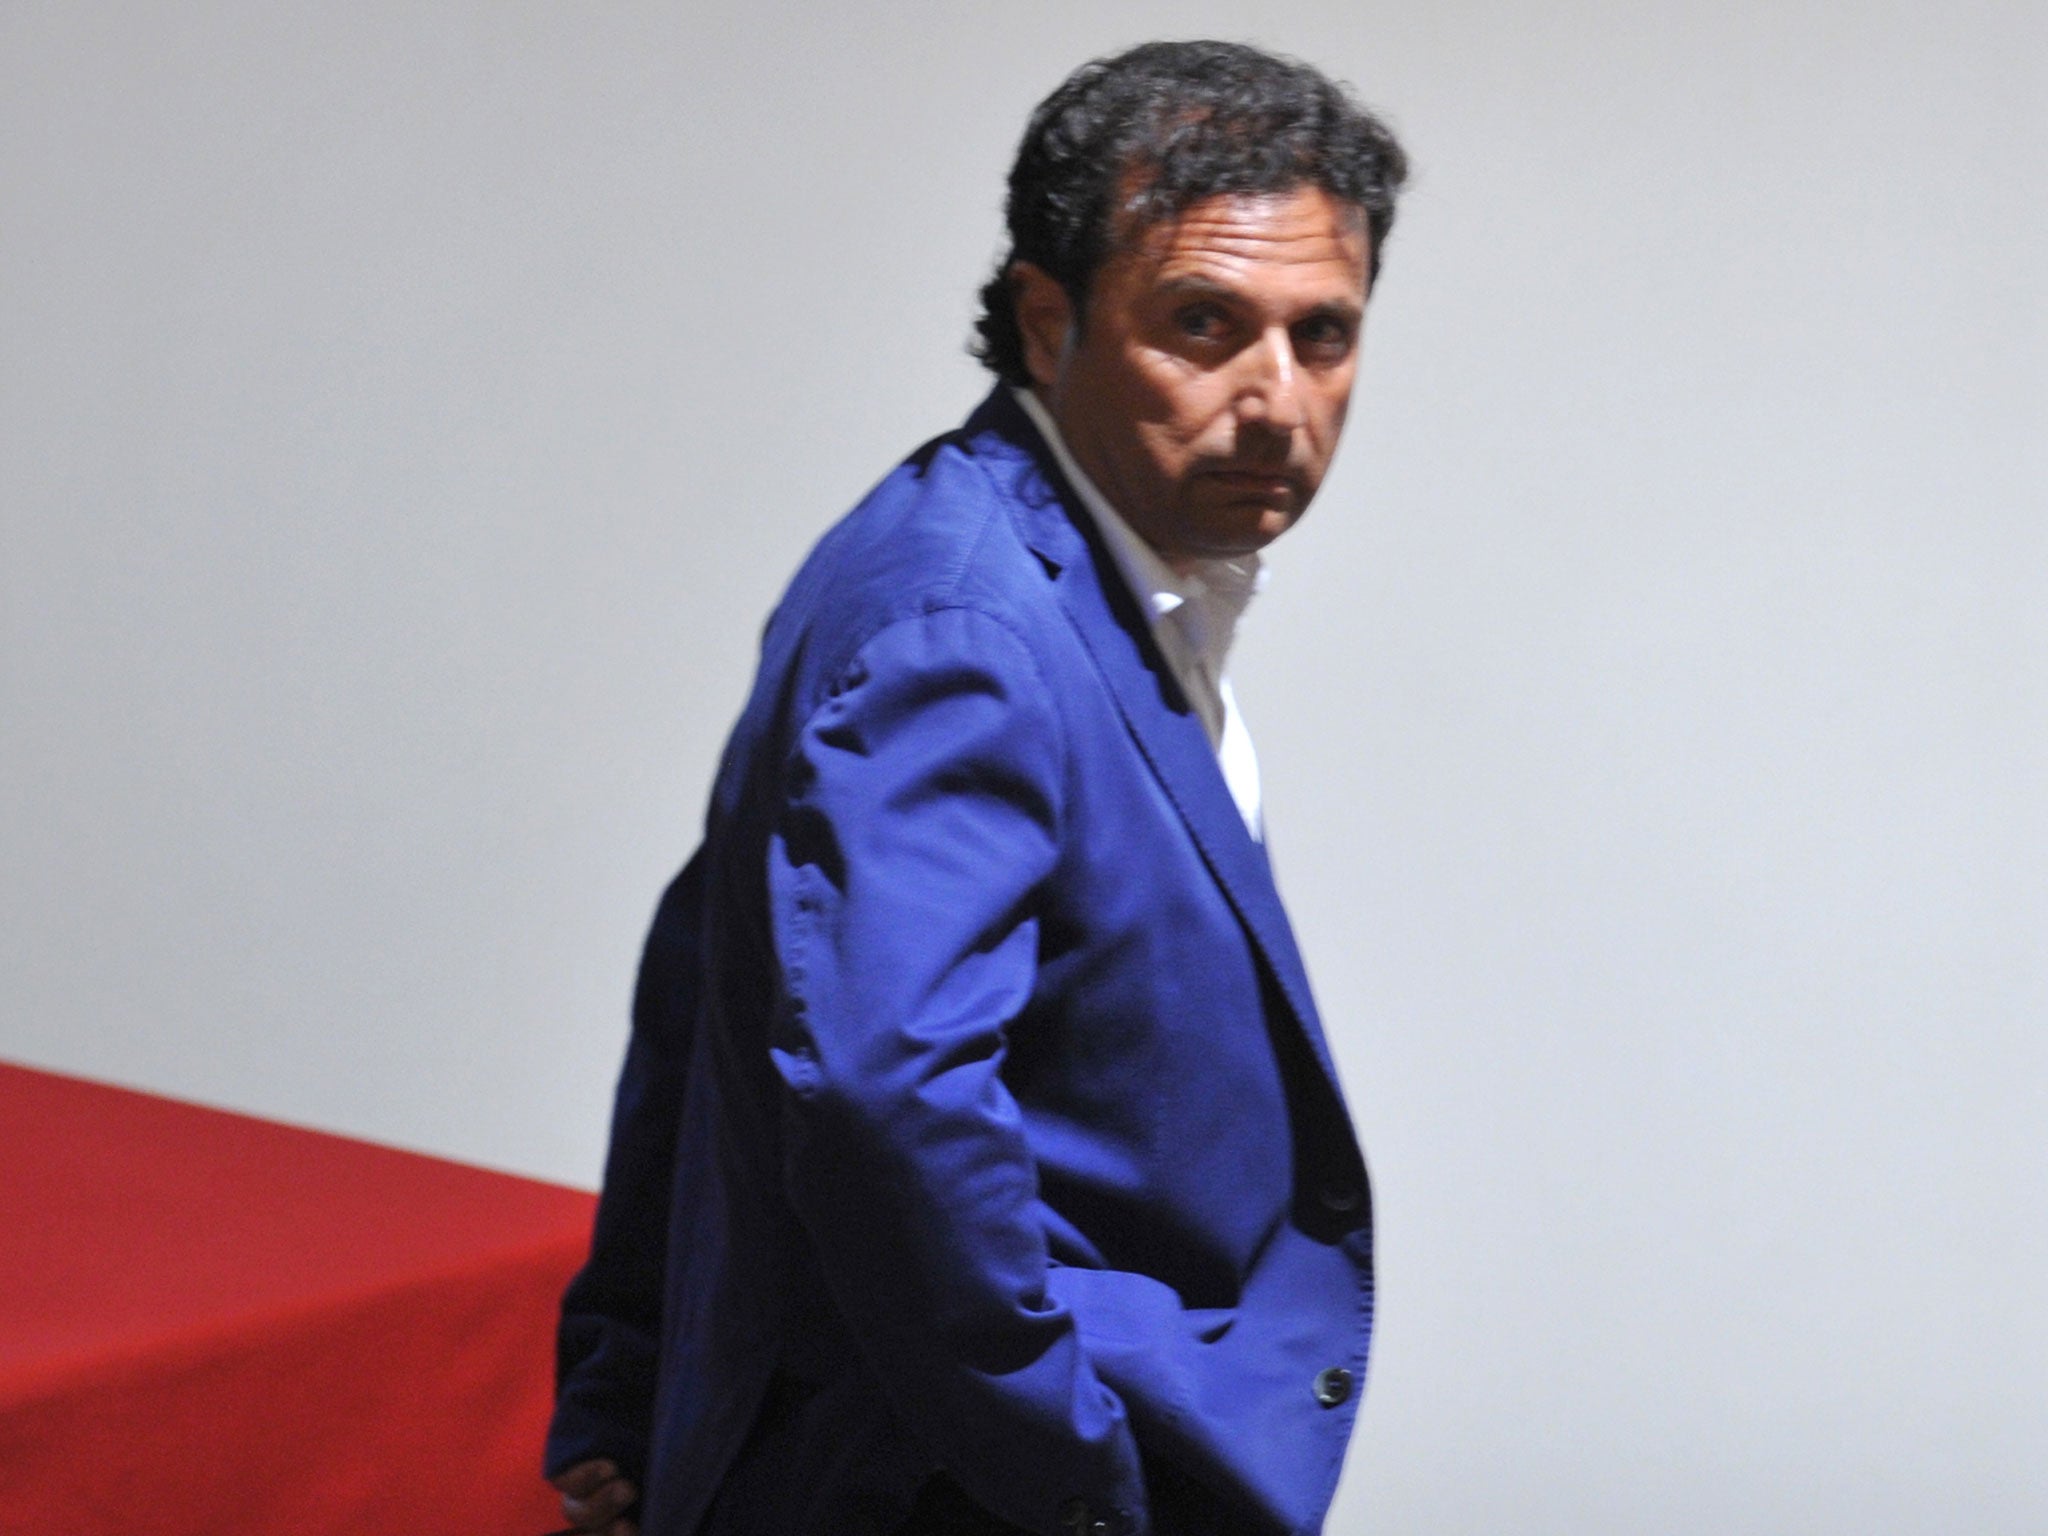 The captain of the ill-fated Costa Concordia cruise ship, Francesco Schettino takes place for his trial on July 9, 2013 in Grosseto. Schettino is charged with multiple manslaughter over the 32 people who lost their lives and is accused of abandoning the ship while terrified passengers were still inside in the January 13, 2012, disaster.